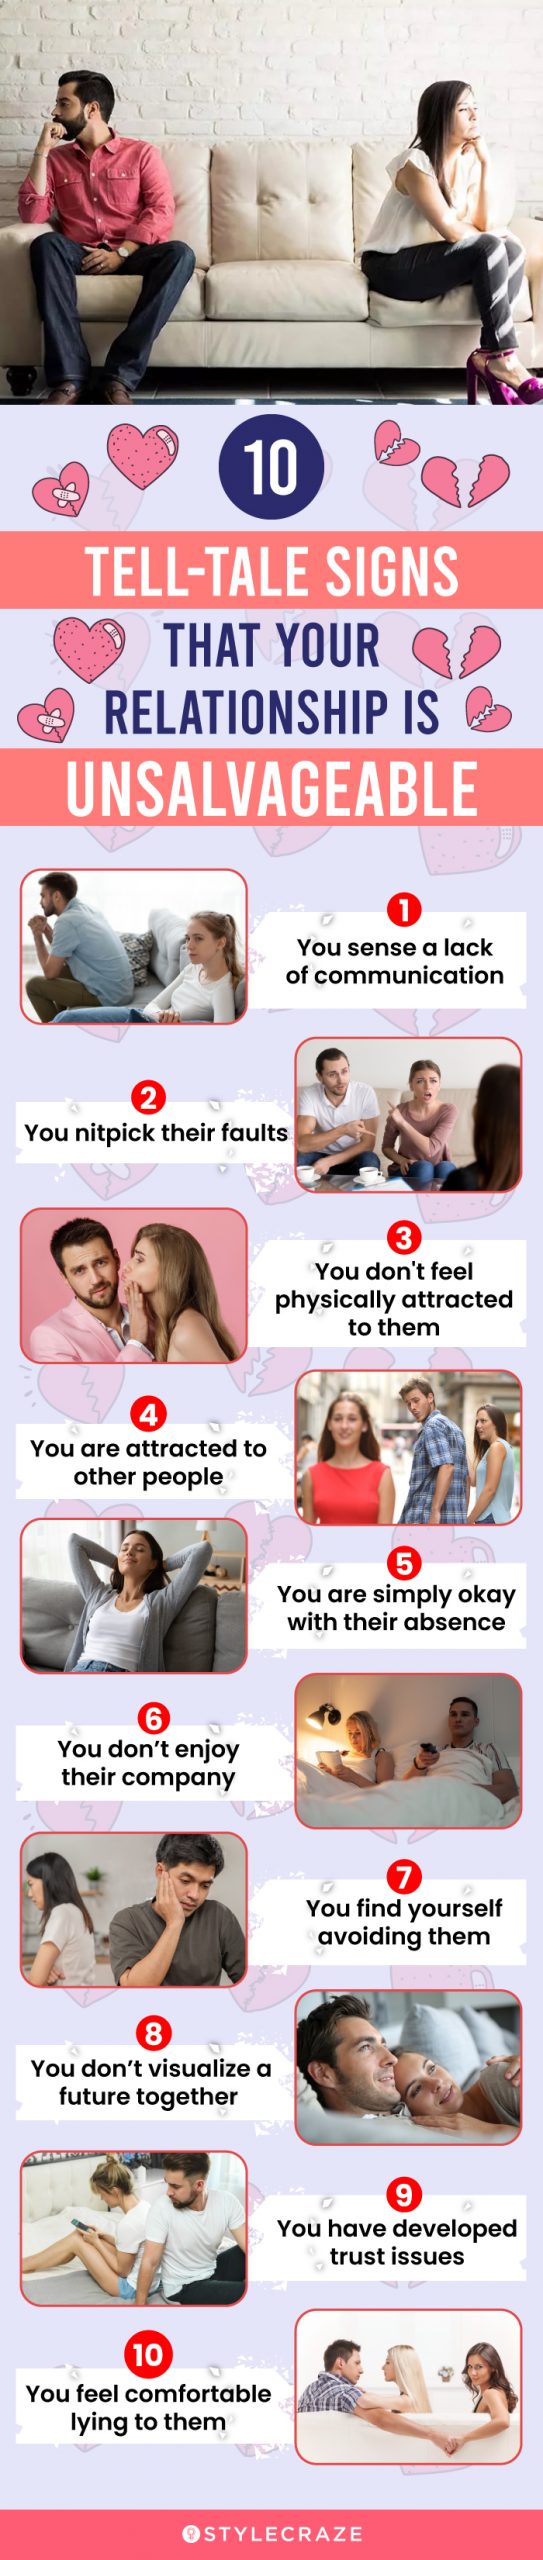 10 tell tale signs that your relationship is unsalvageable (infographic)